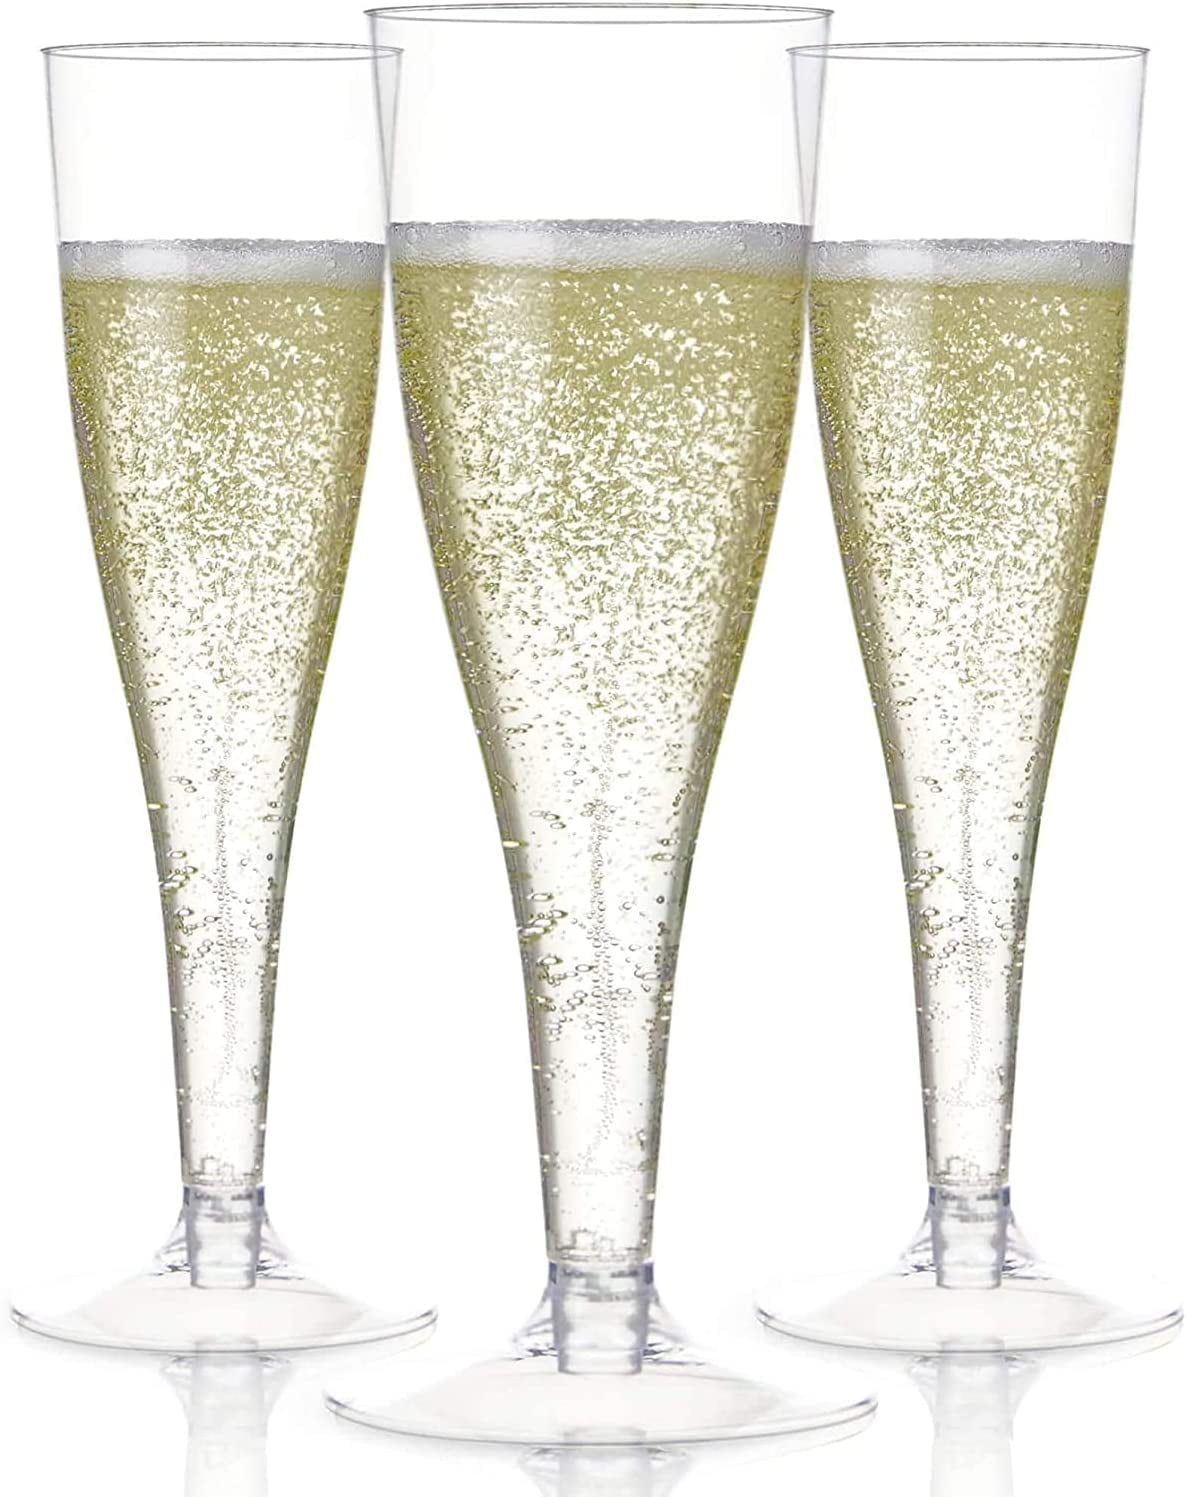 PARNOO Set of 10 Classic Flute Champagne Stemless Glasses (10 Ounce) - Toasting Sparkling Wine/Wedding Flutes, Champagne